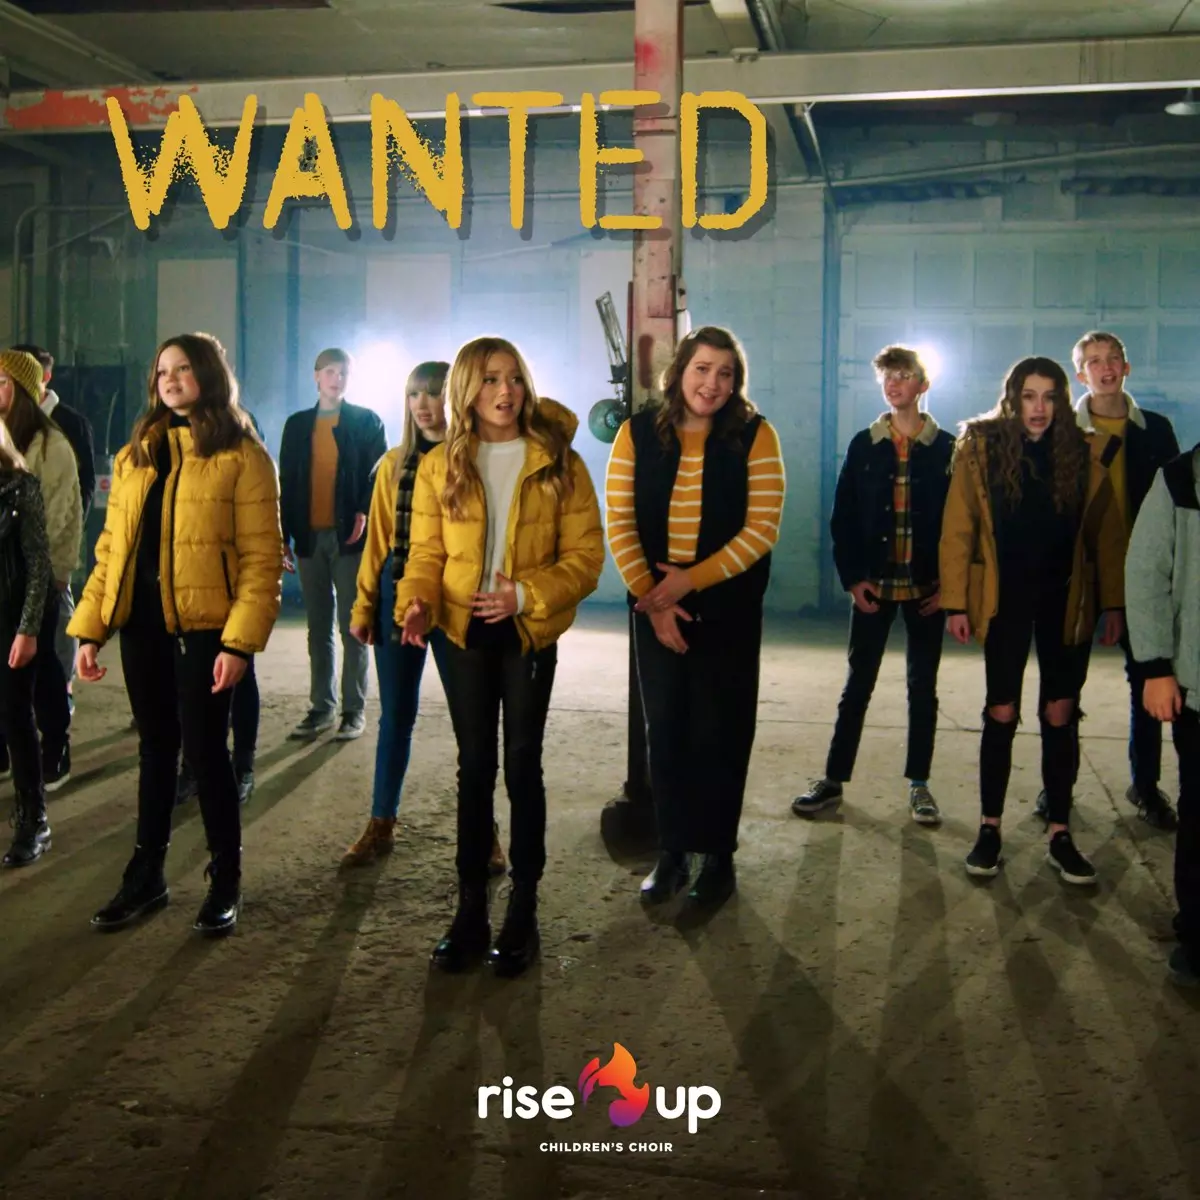 Wanted - Single by Rise Up Children's Choir on Apple Music